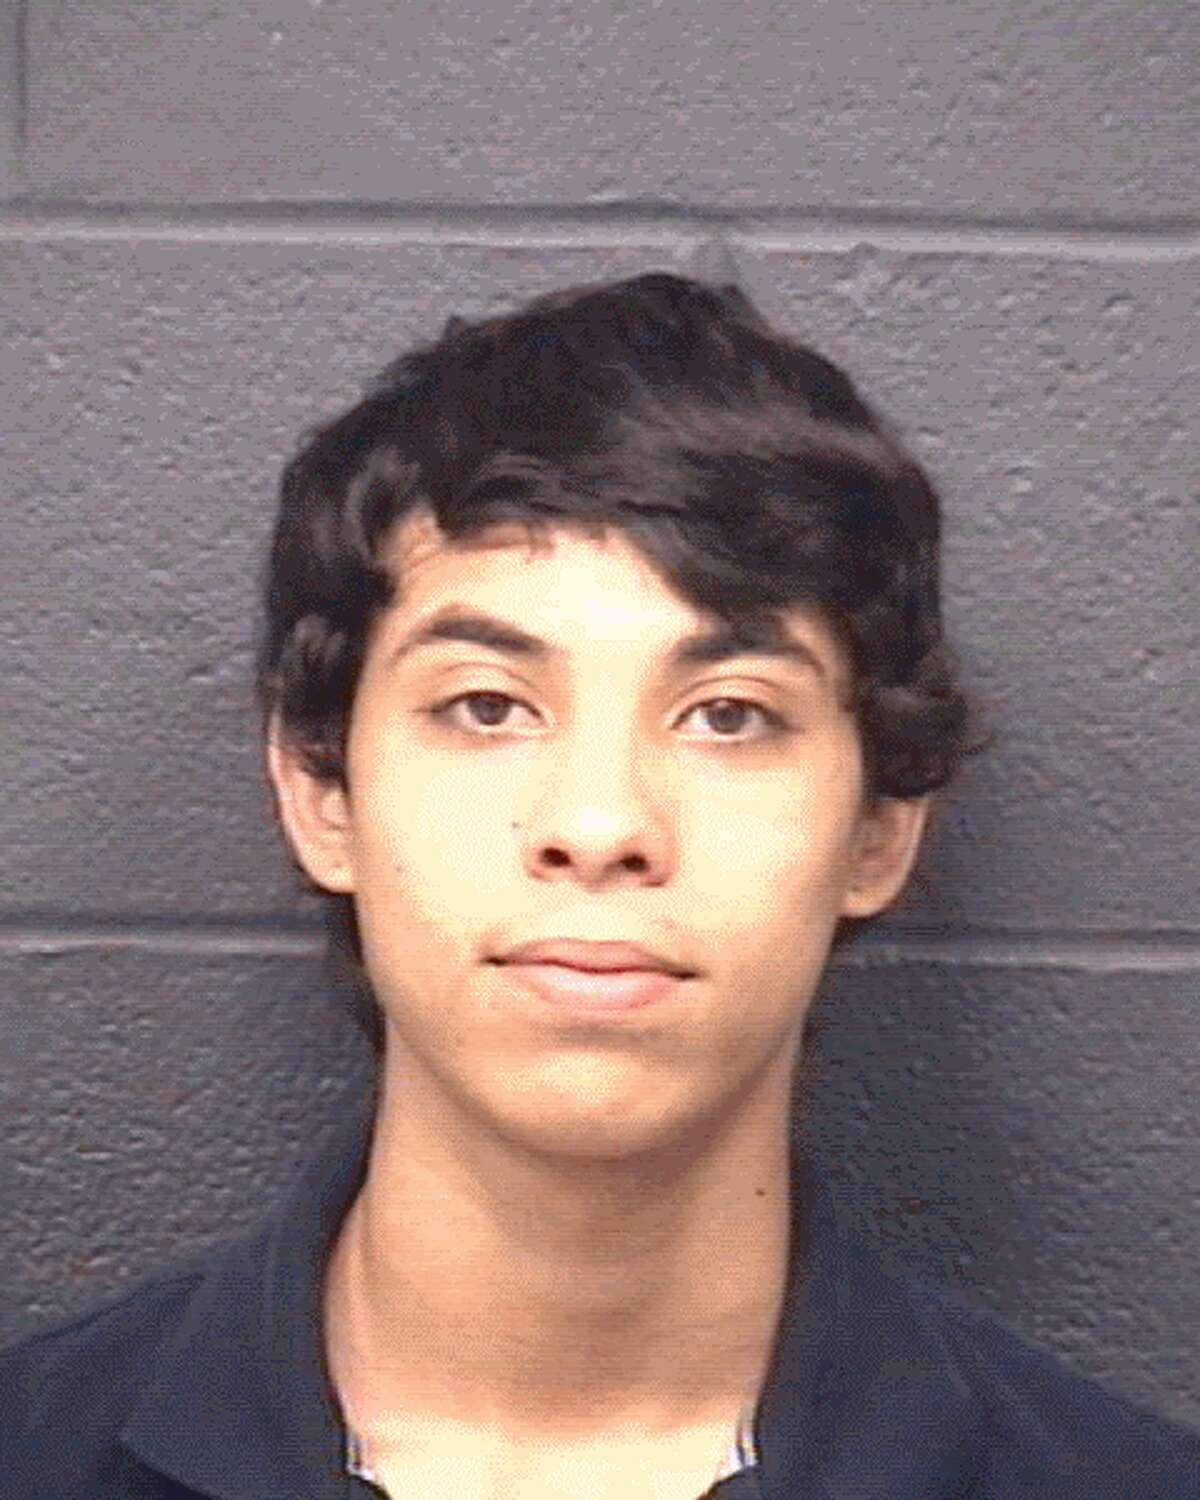 TREVINO, JUAN (W M) (23) years of age was arrested on the charge of POSS MARIJ